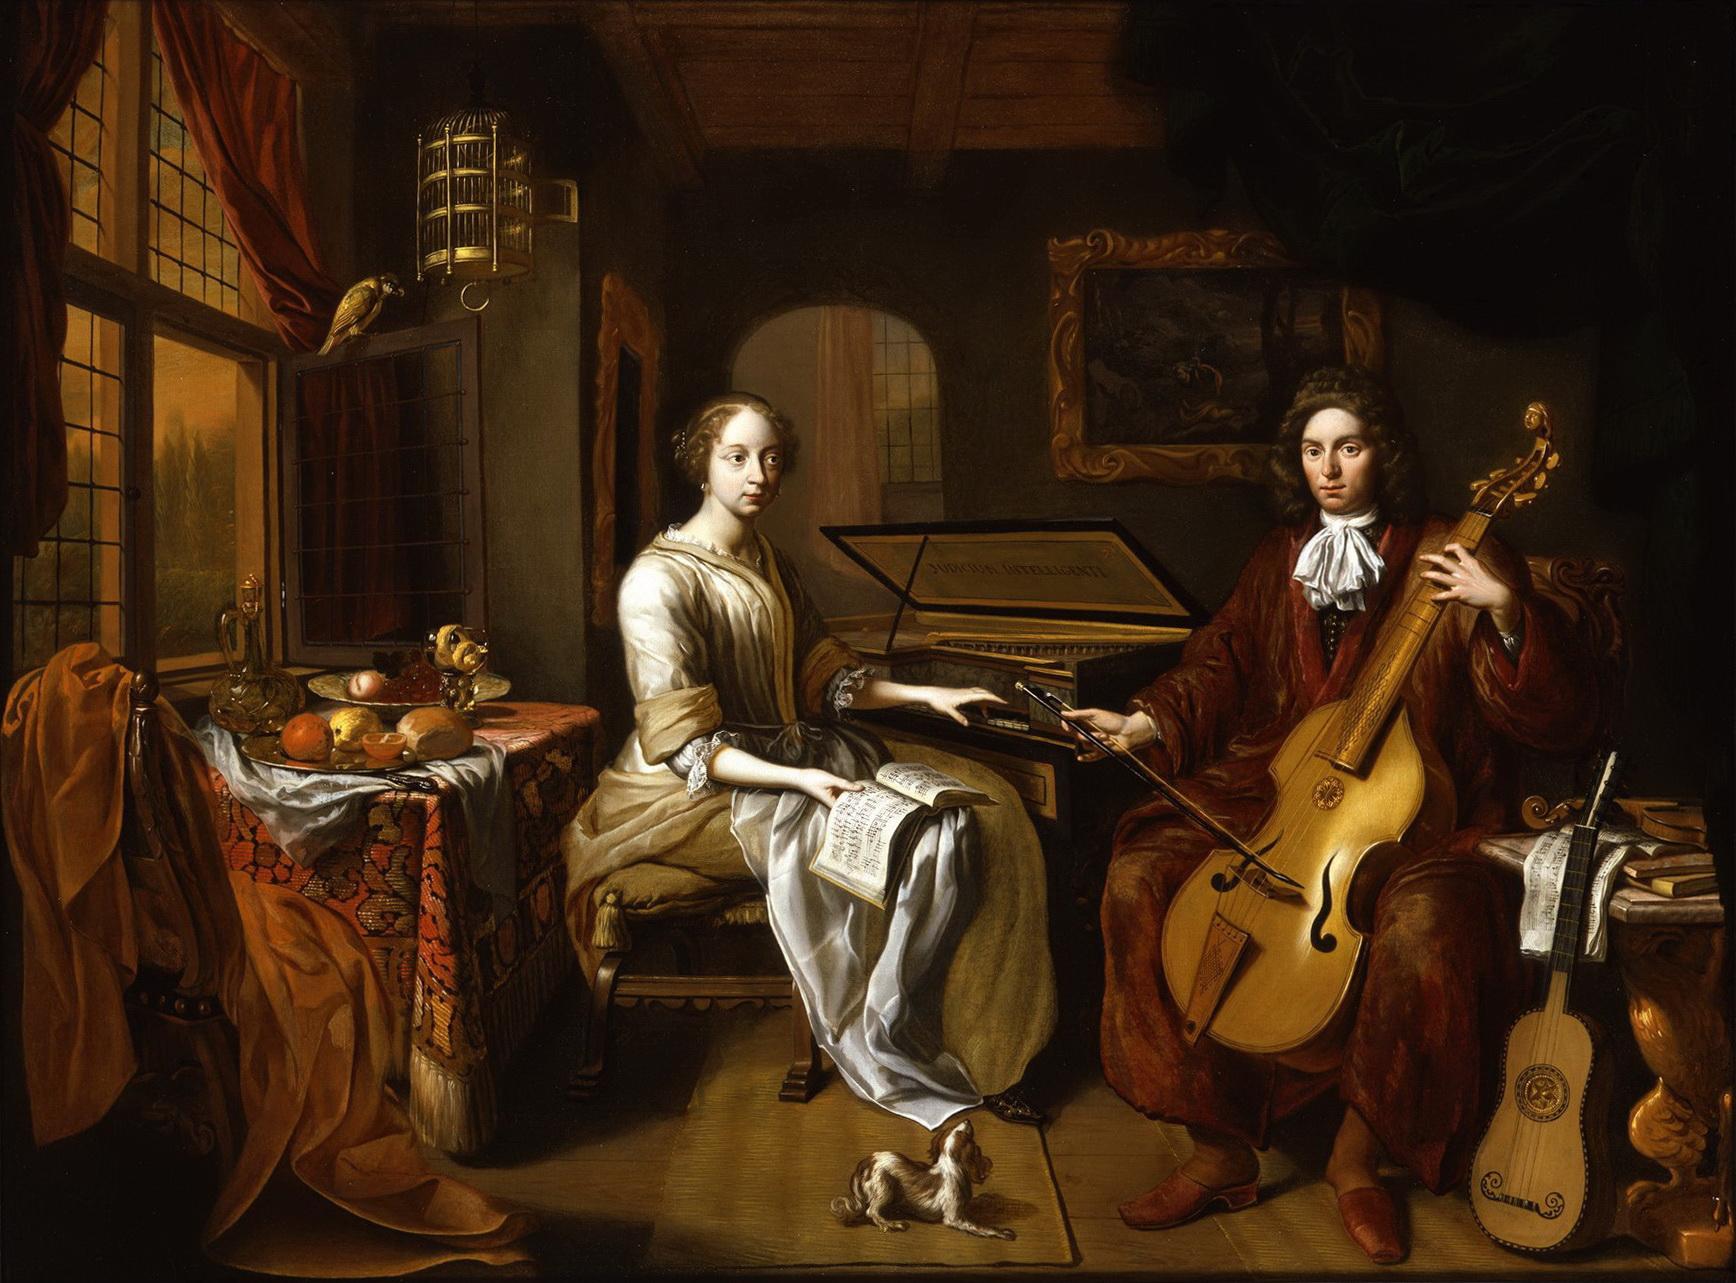 HERMANNUS COLLENIUS
(Kollum 1650 - 1723 Groningen)

In a spacious interior, an elegant young couple is making music.  She is fashionably dressed and sits on a stool by a virginal: with one hand she strikes a note on the keyboard, while in the